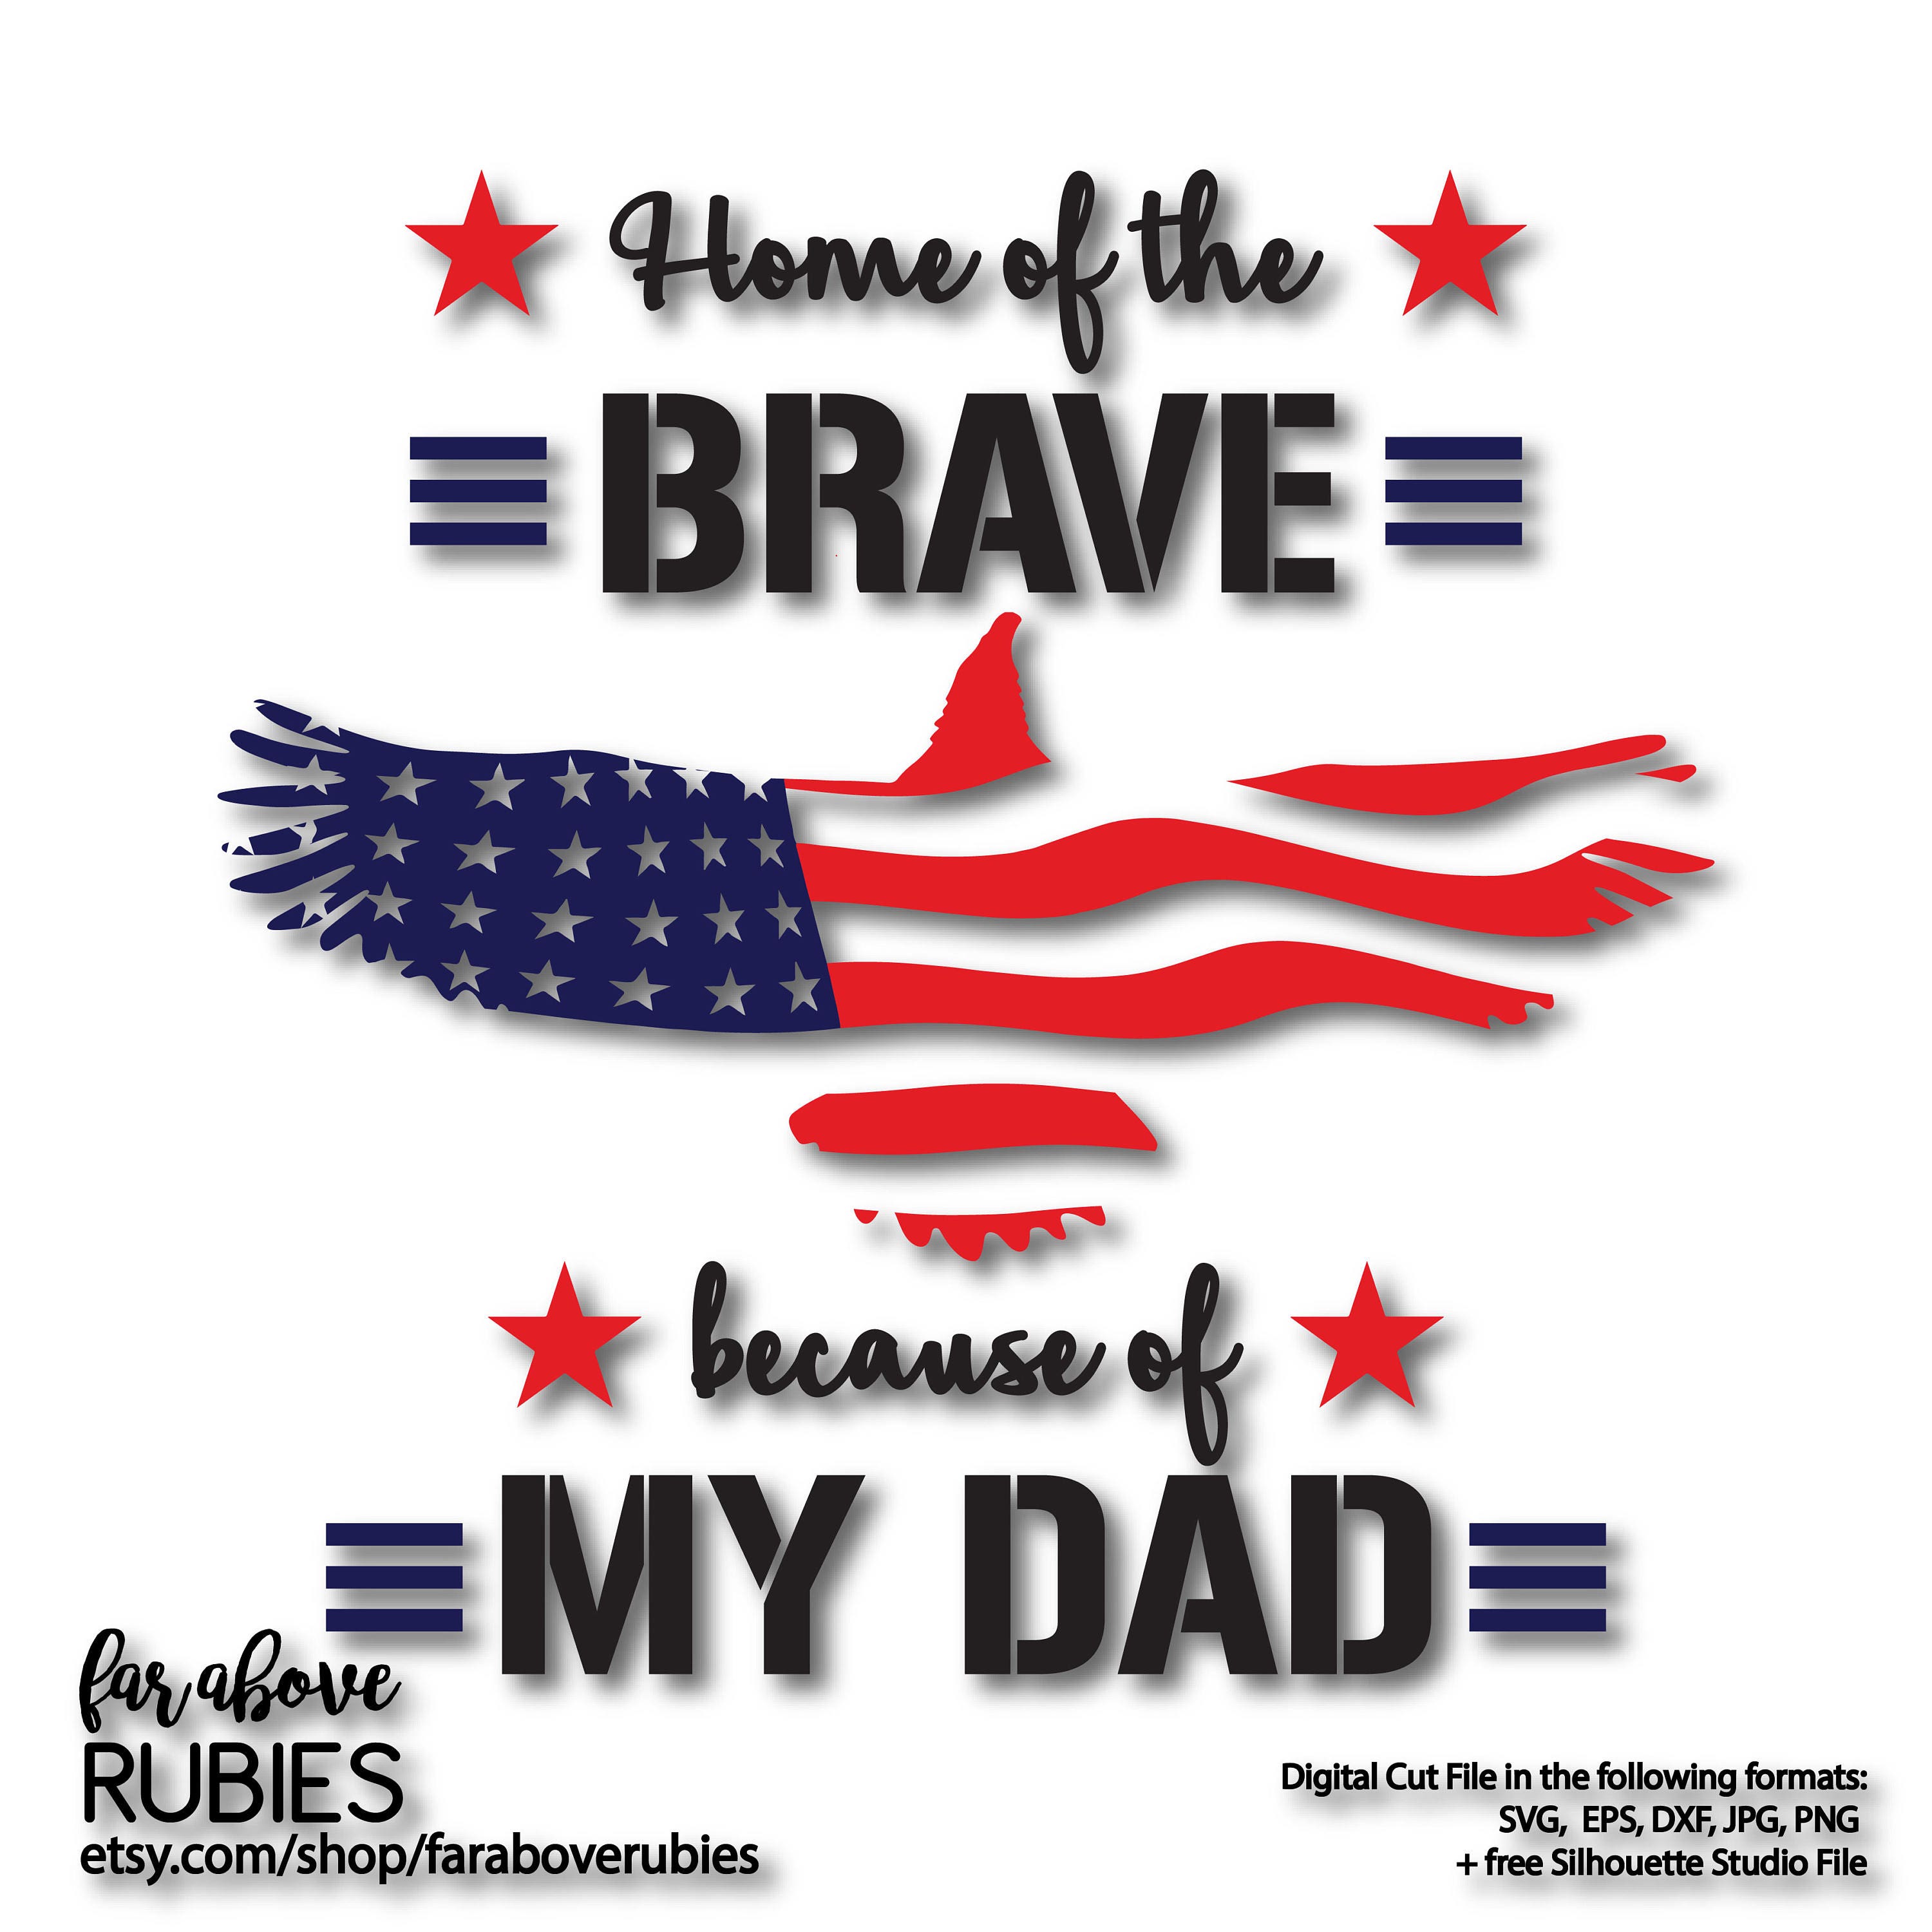 Home of the Brave because of My Dad American Flag Eagle SVG